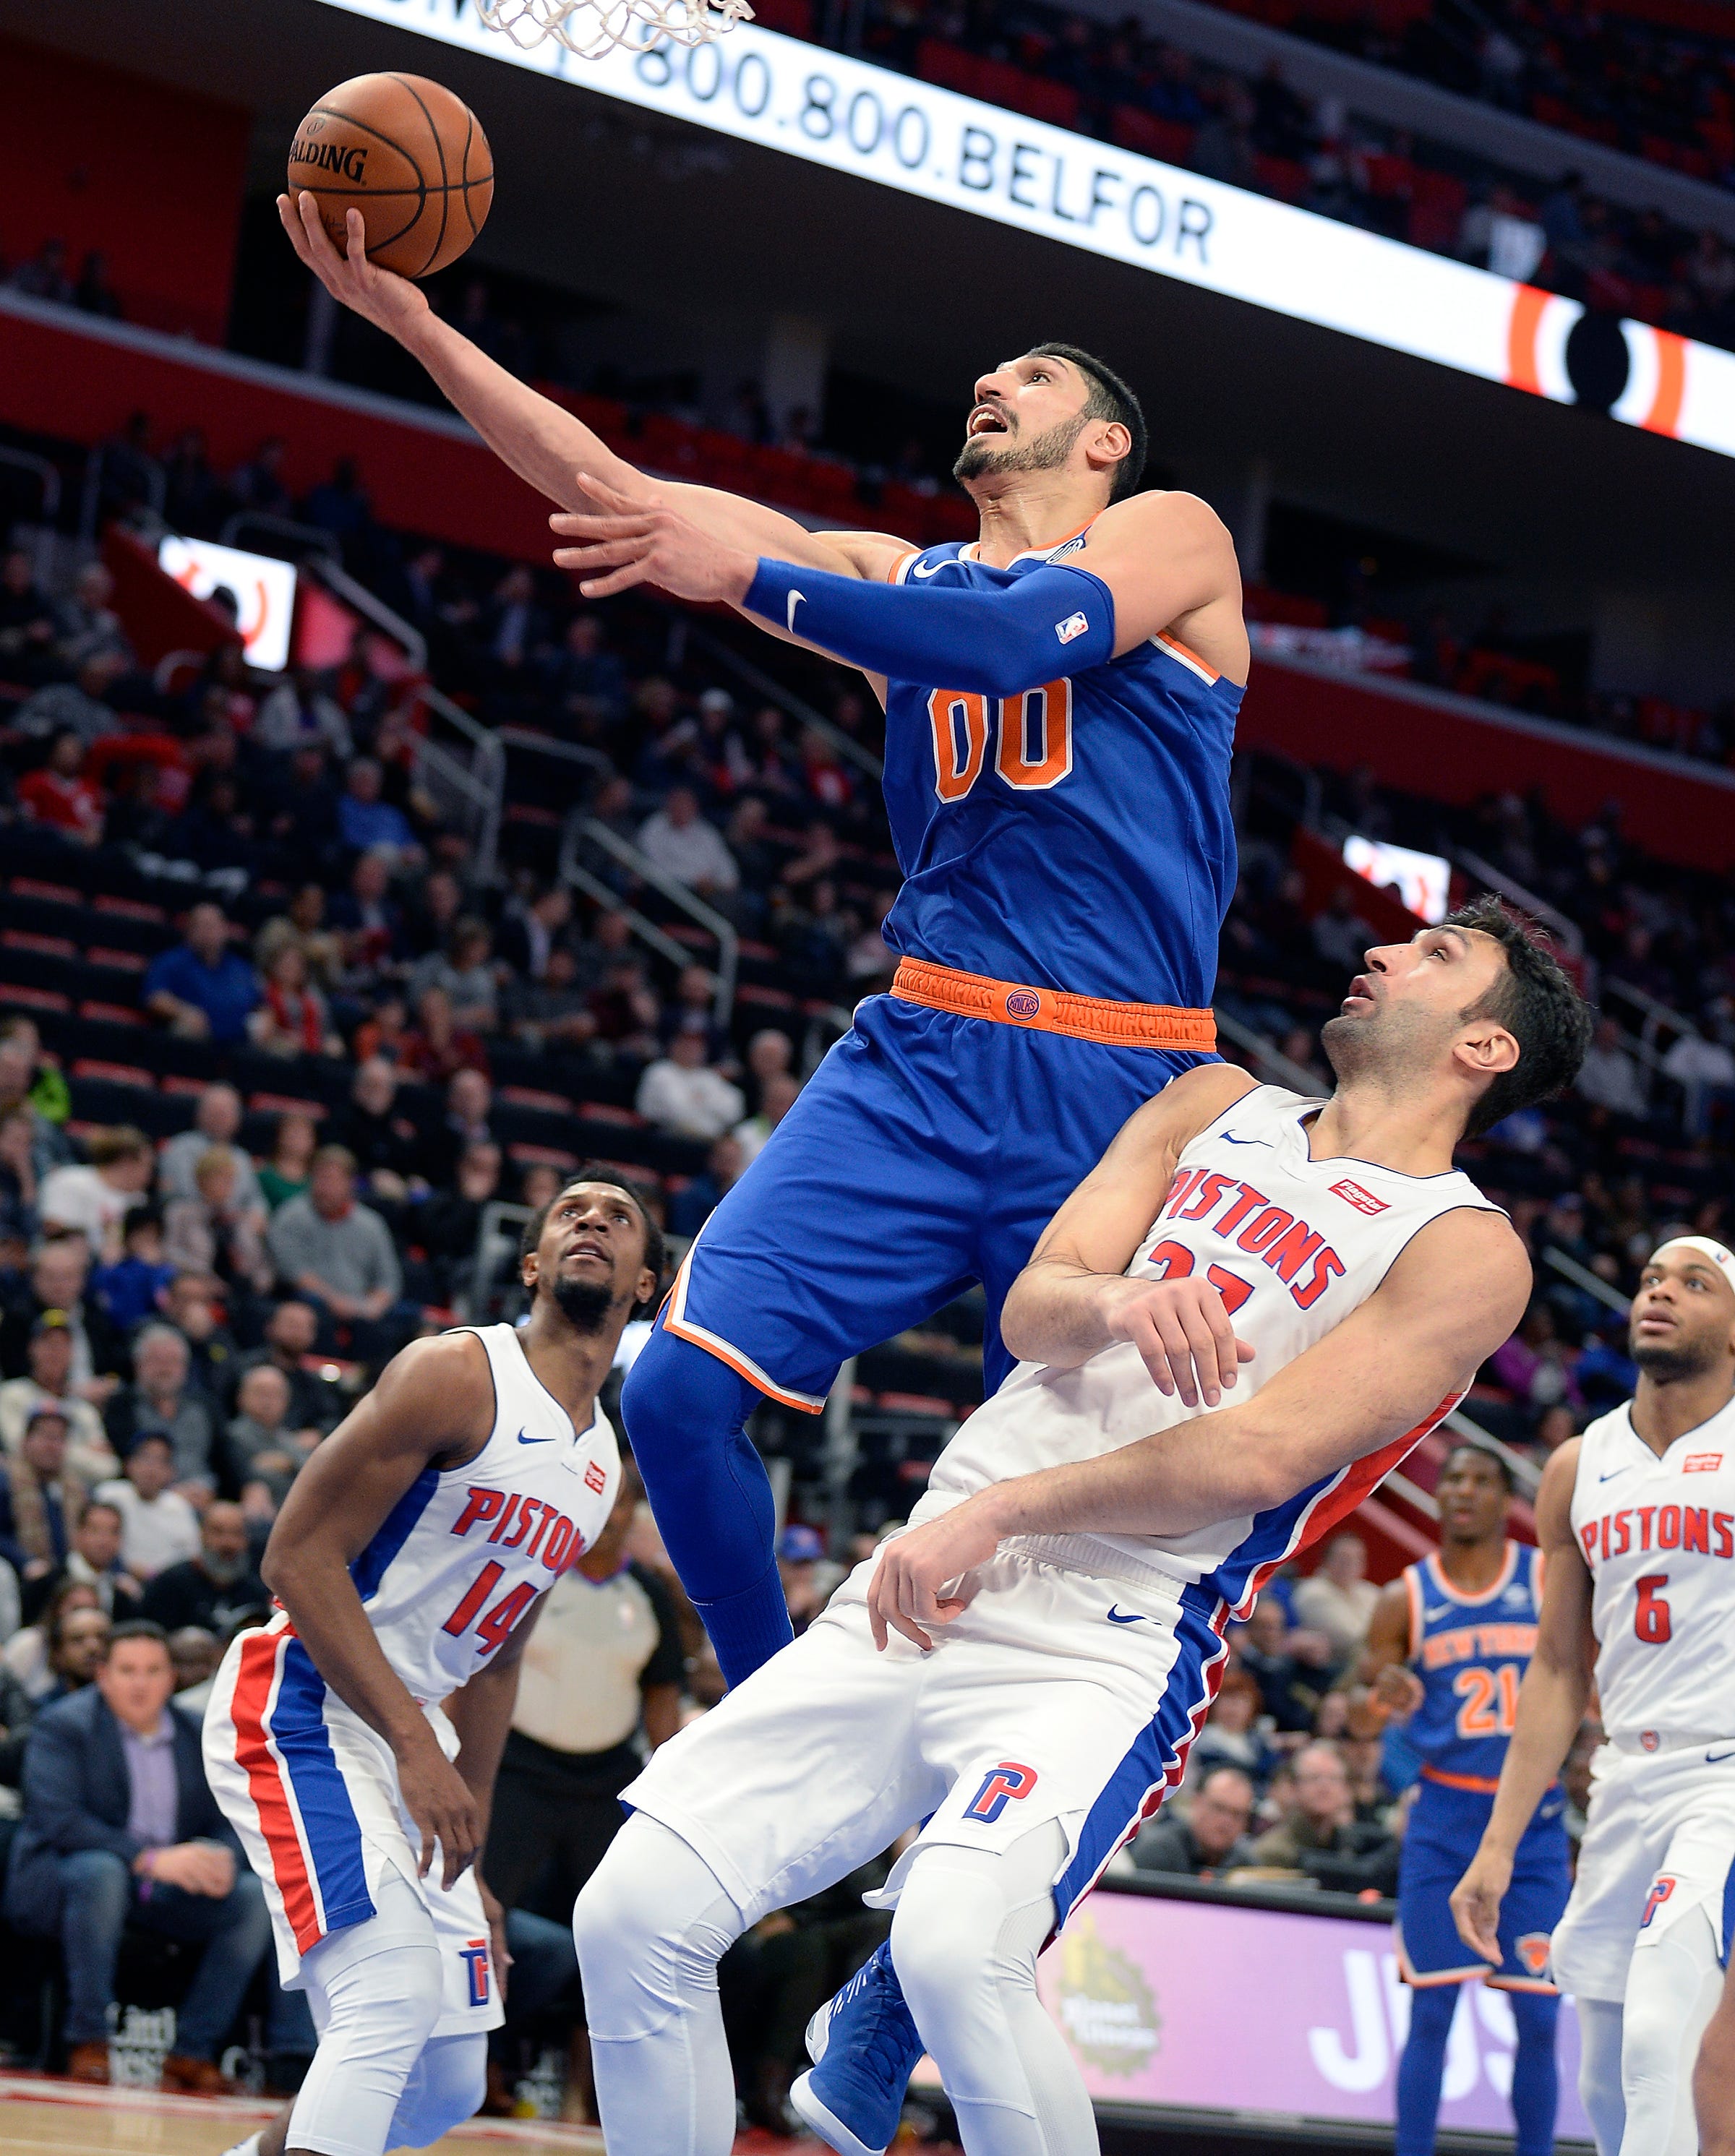 Knicks ' Enes Kanter scores over Pistons ' Zaza Pachulia in the fourth quarter.